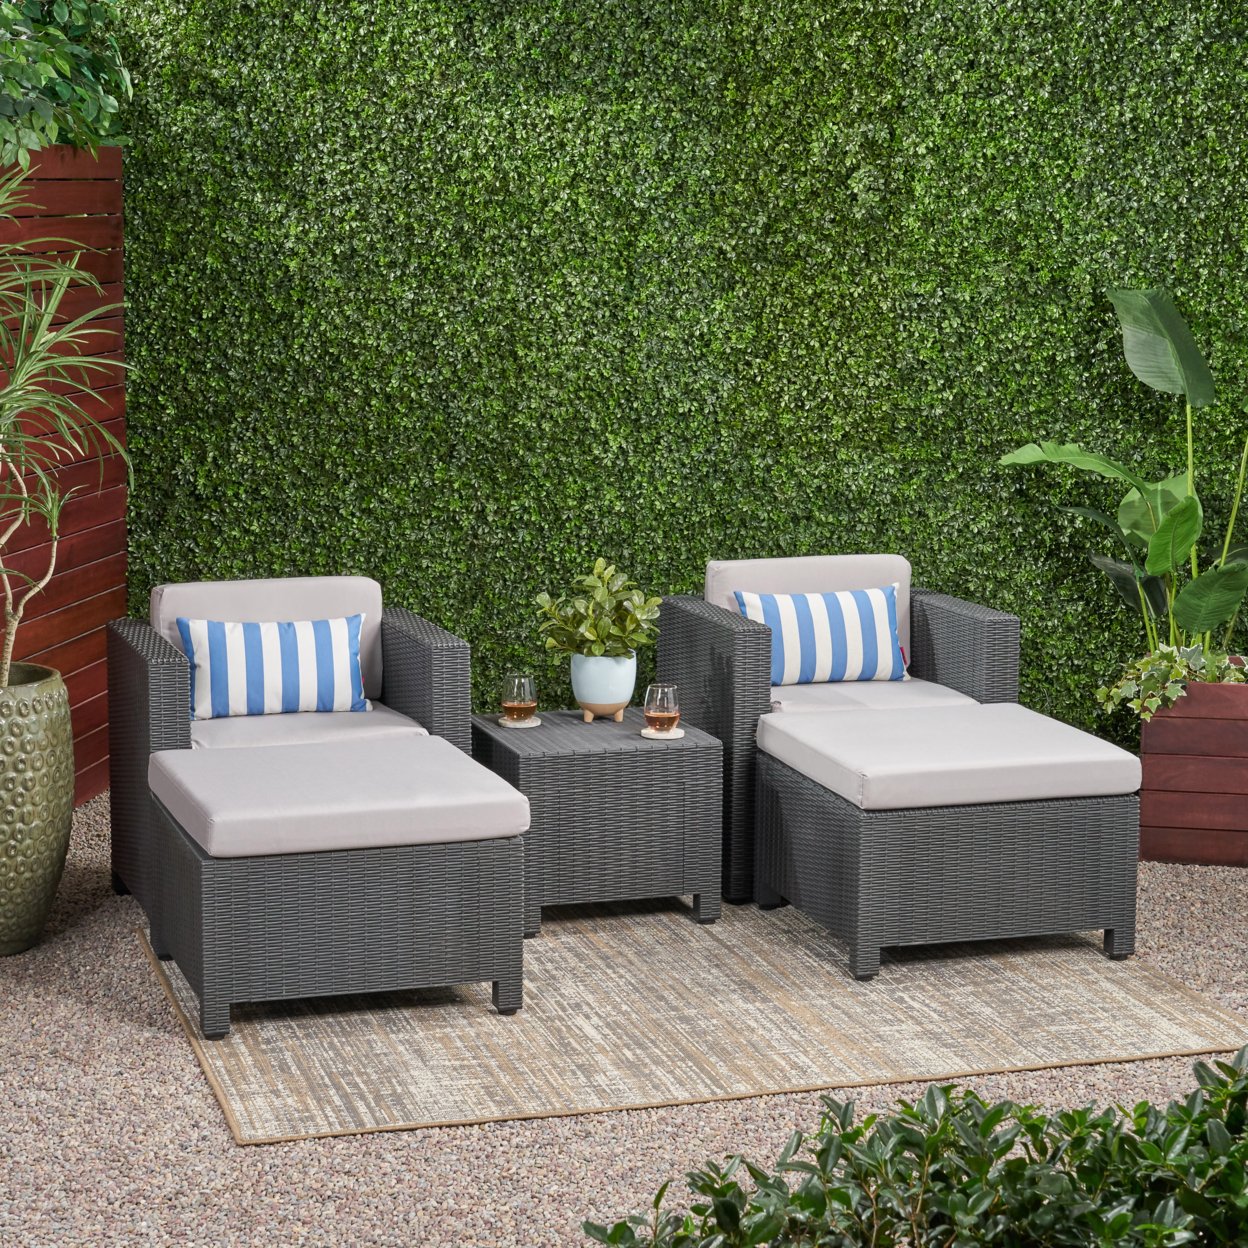 Dottie Outdoor Wicker 2 Seater Chat Set With Ottomans - Dark Gray + Gray